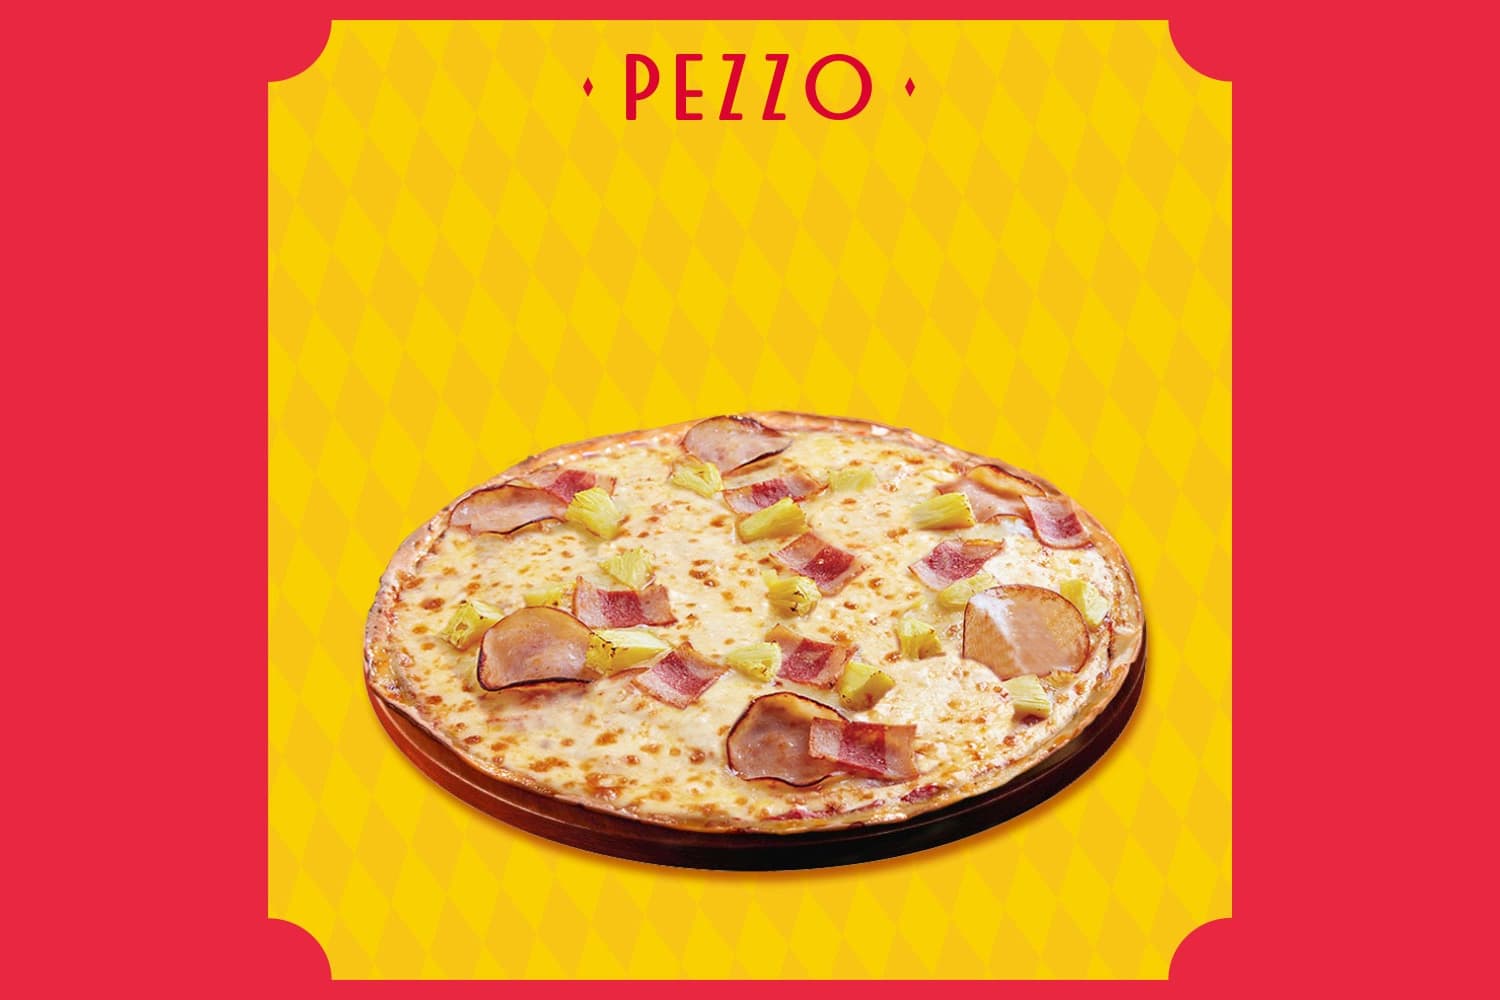 1 x 10'’ Personal Pizza Pan at Pezzo - Get Deals, Cashback and Rewards with ShopBack GO